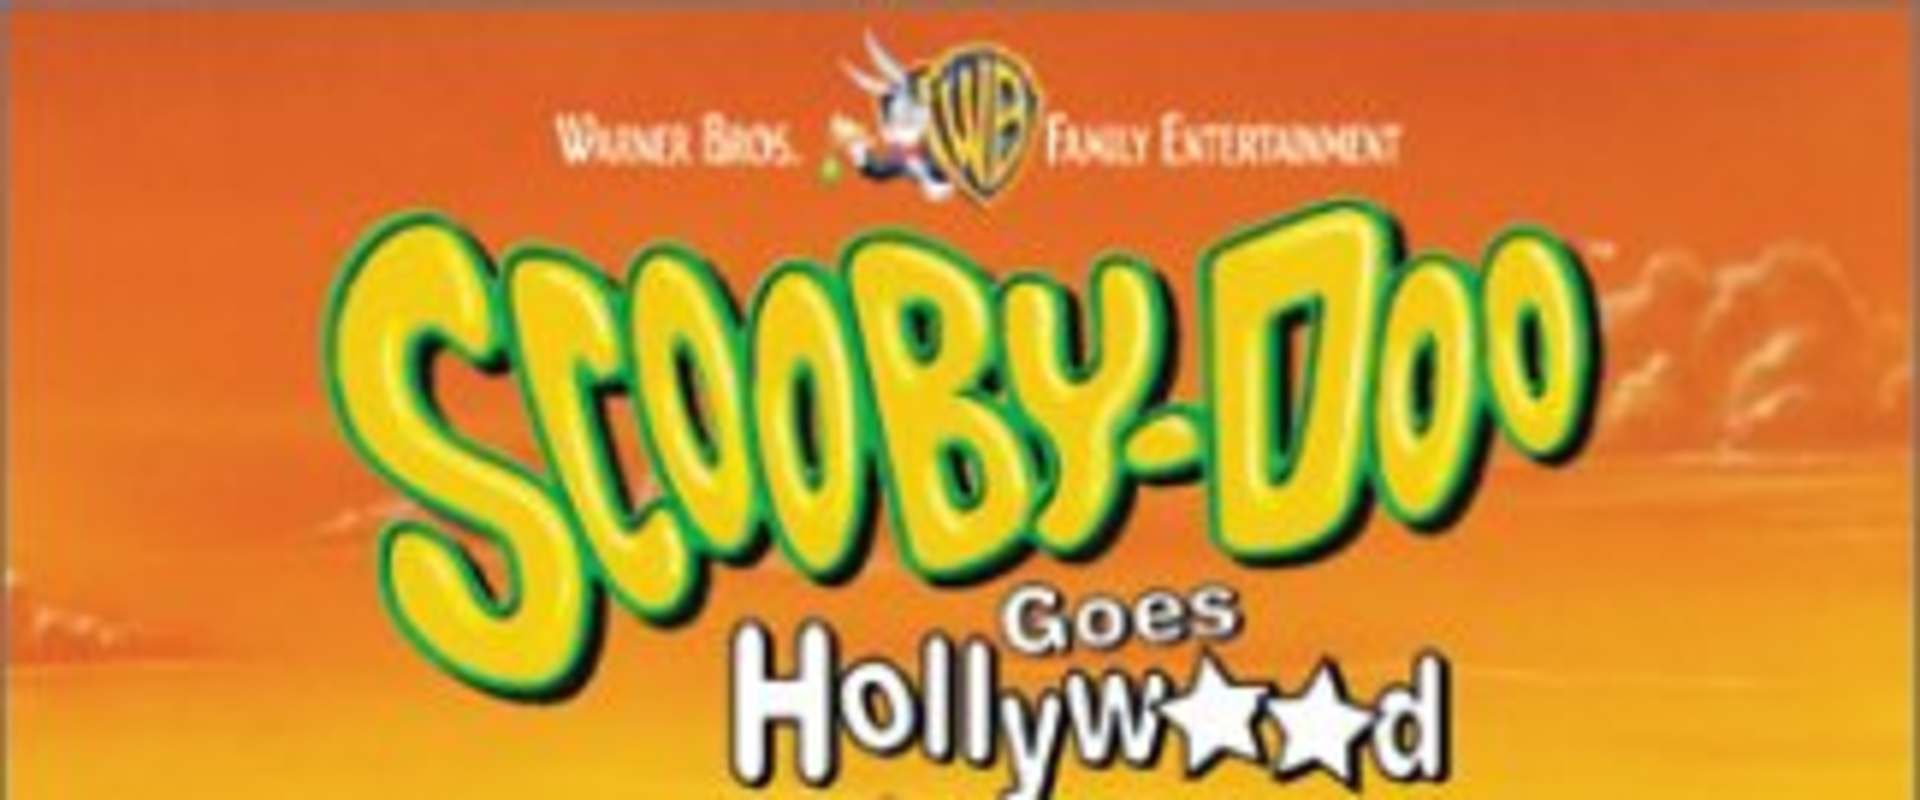 Scooby-Doo Goes Hollywood background 2